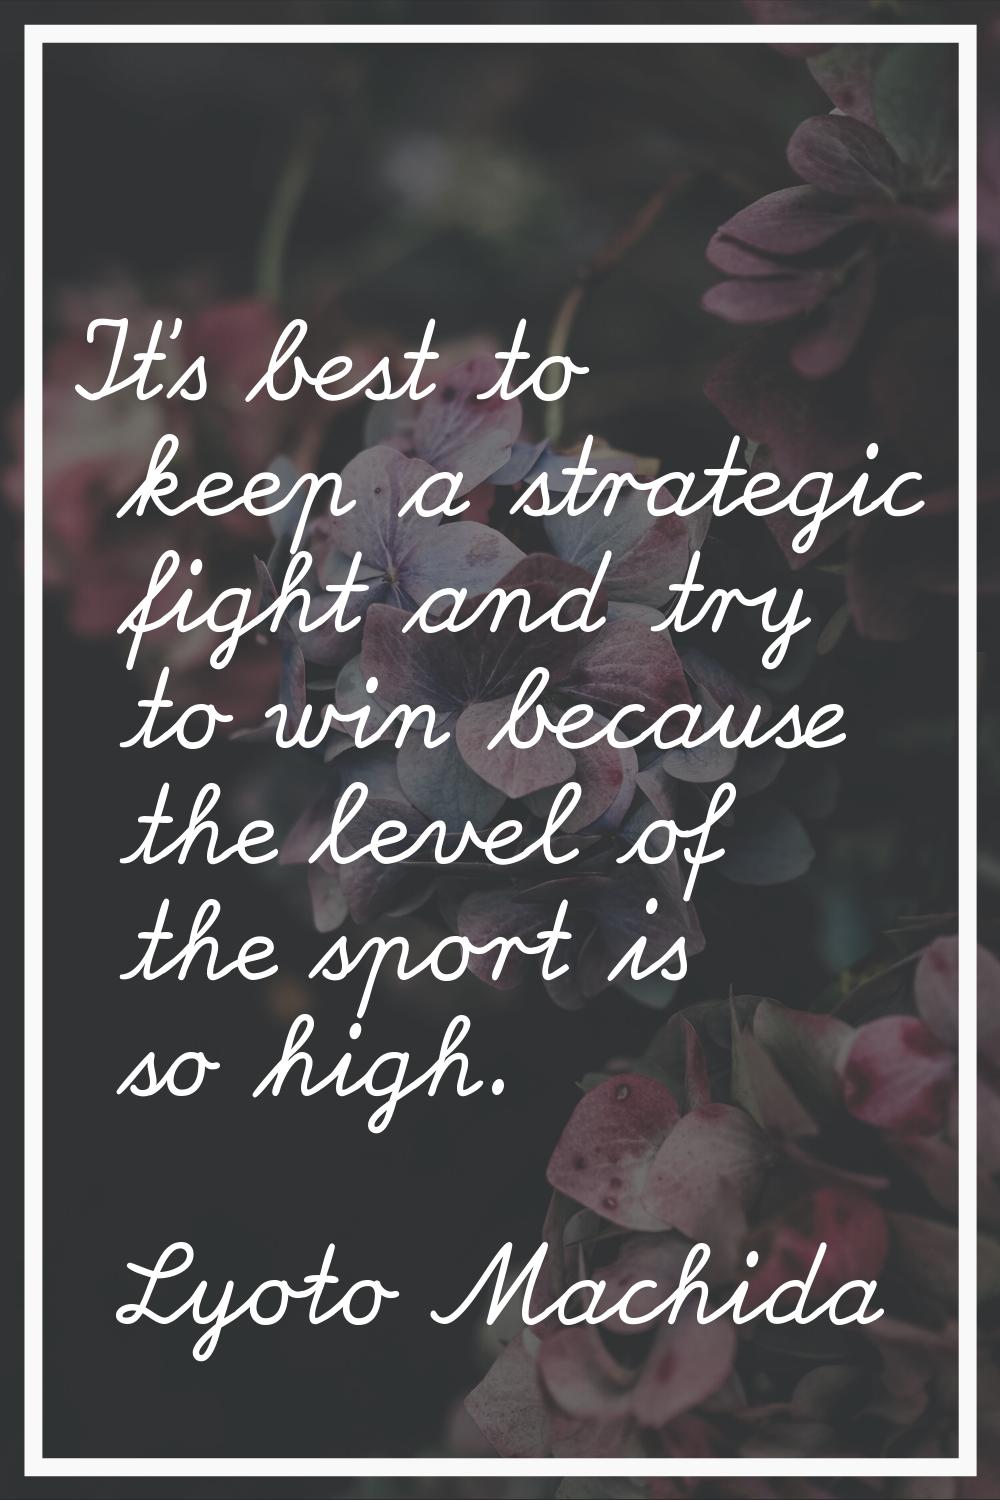 It's best to keep a strategic fight and try to win because the level of the sport is so high.